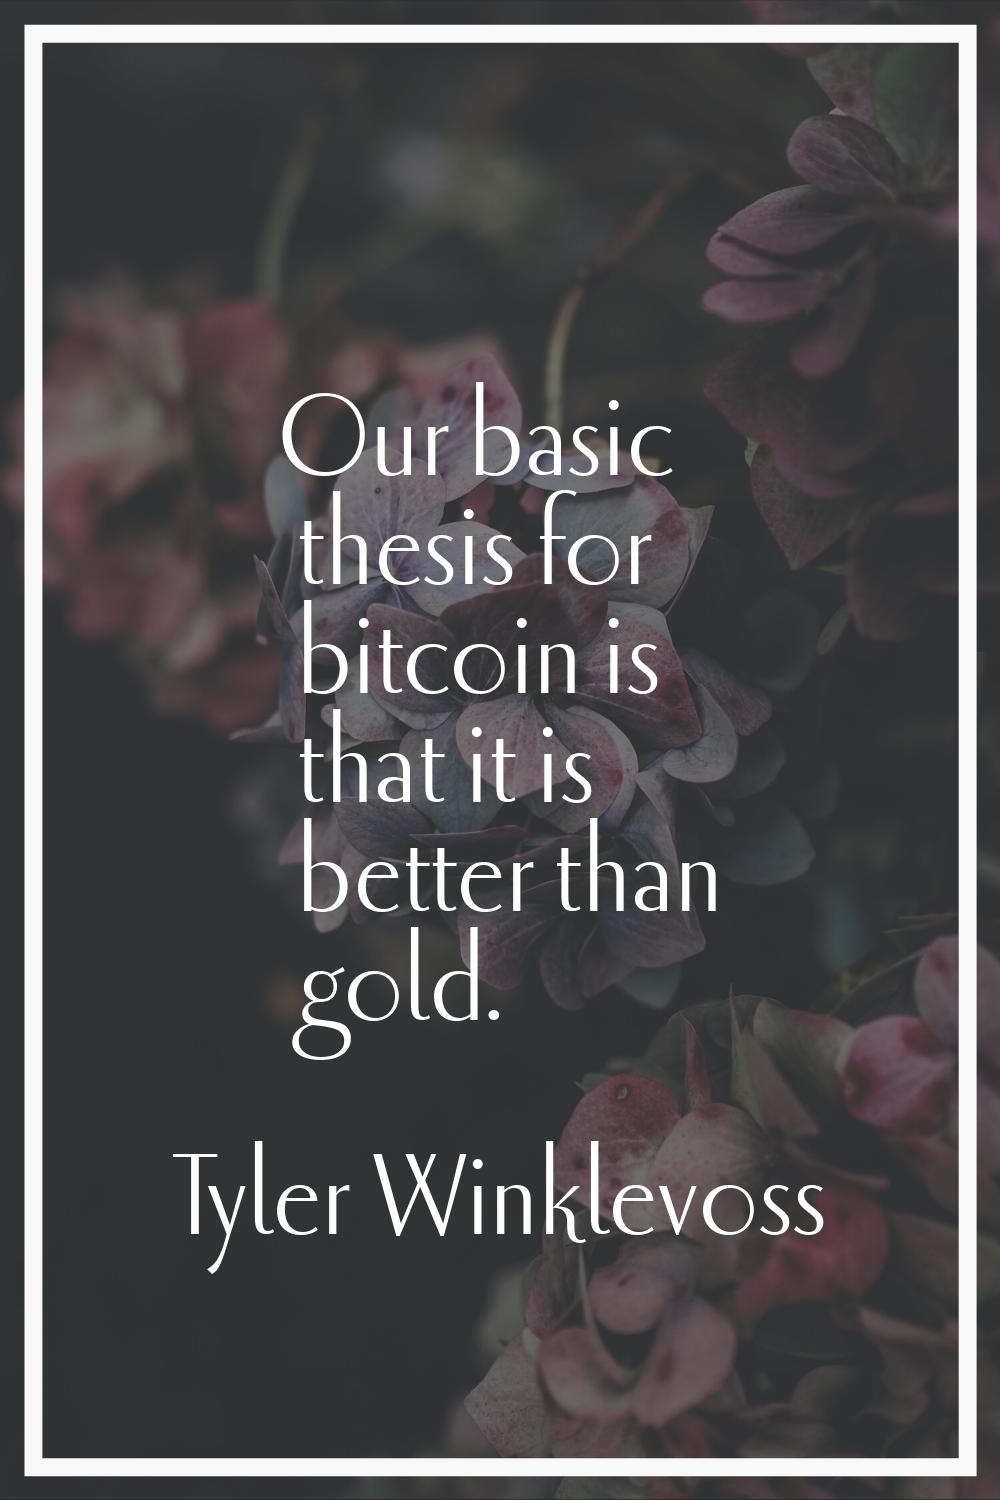 Our basic thesis for bitcoin is that it is better than gold.